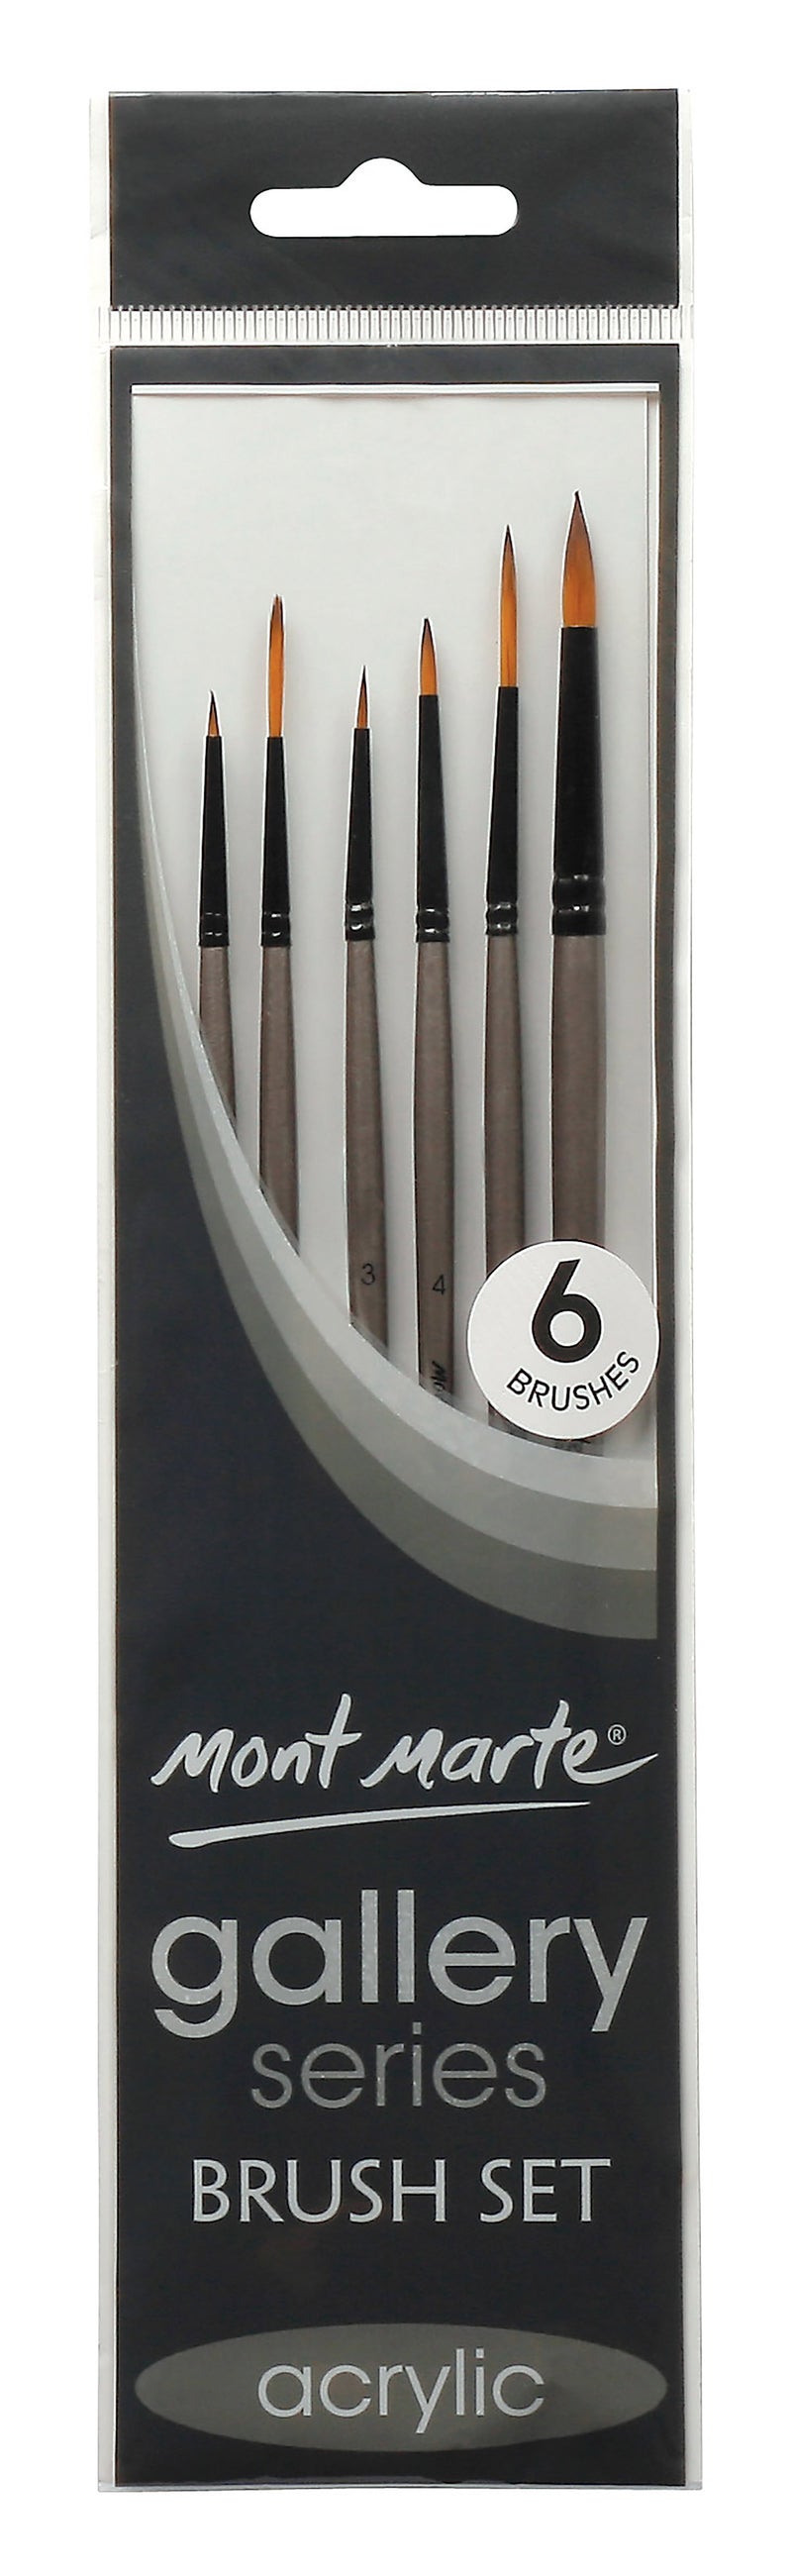 Gallery Paint Brush Set, set of 6, for acrylic, tol1120